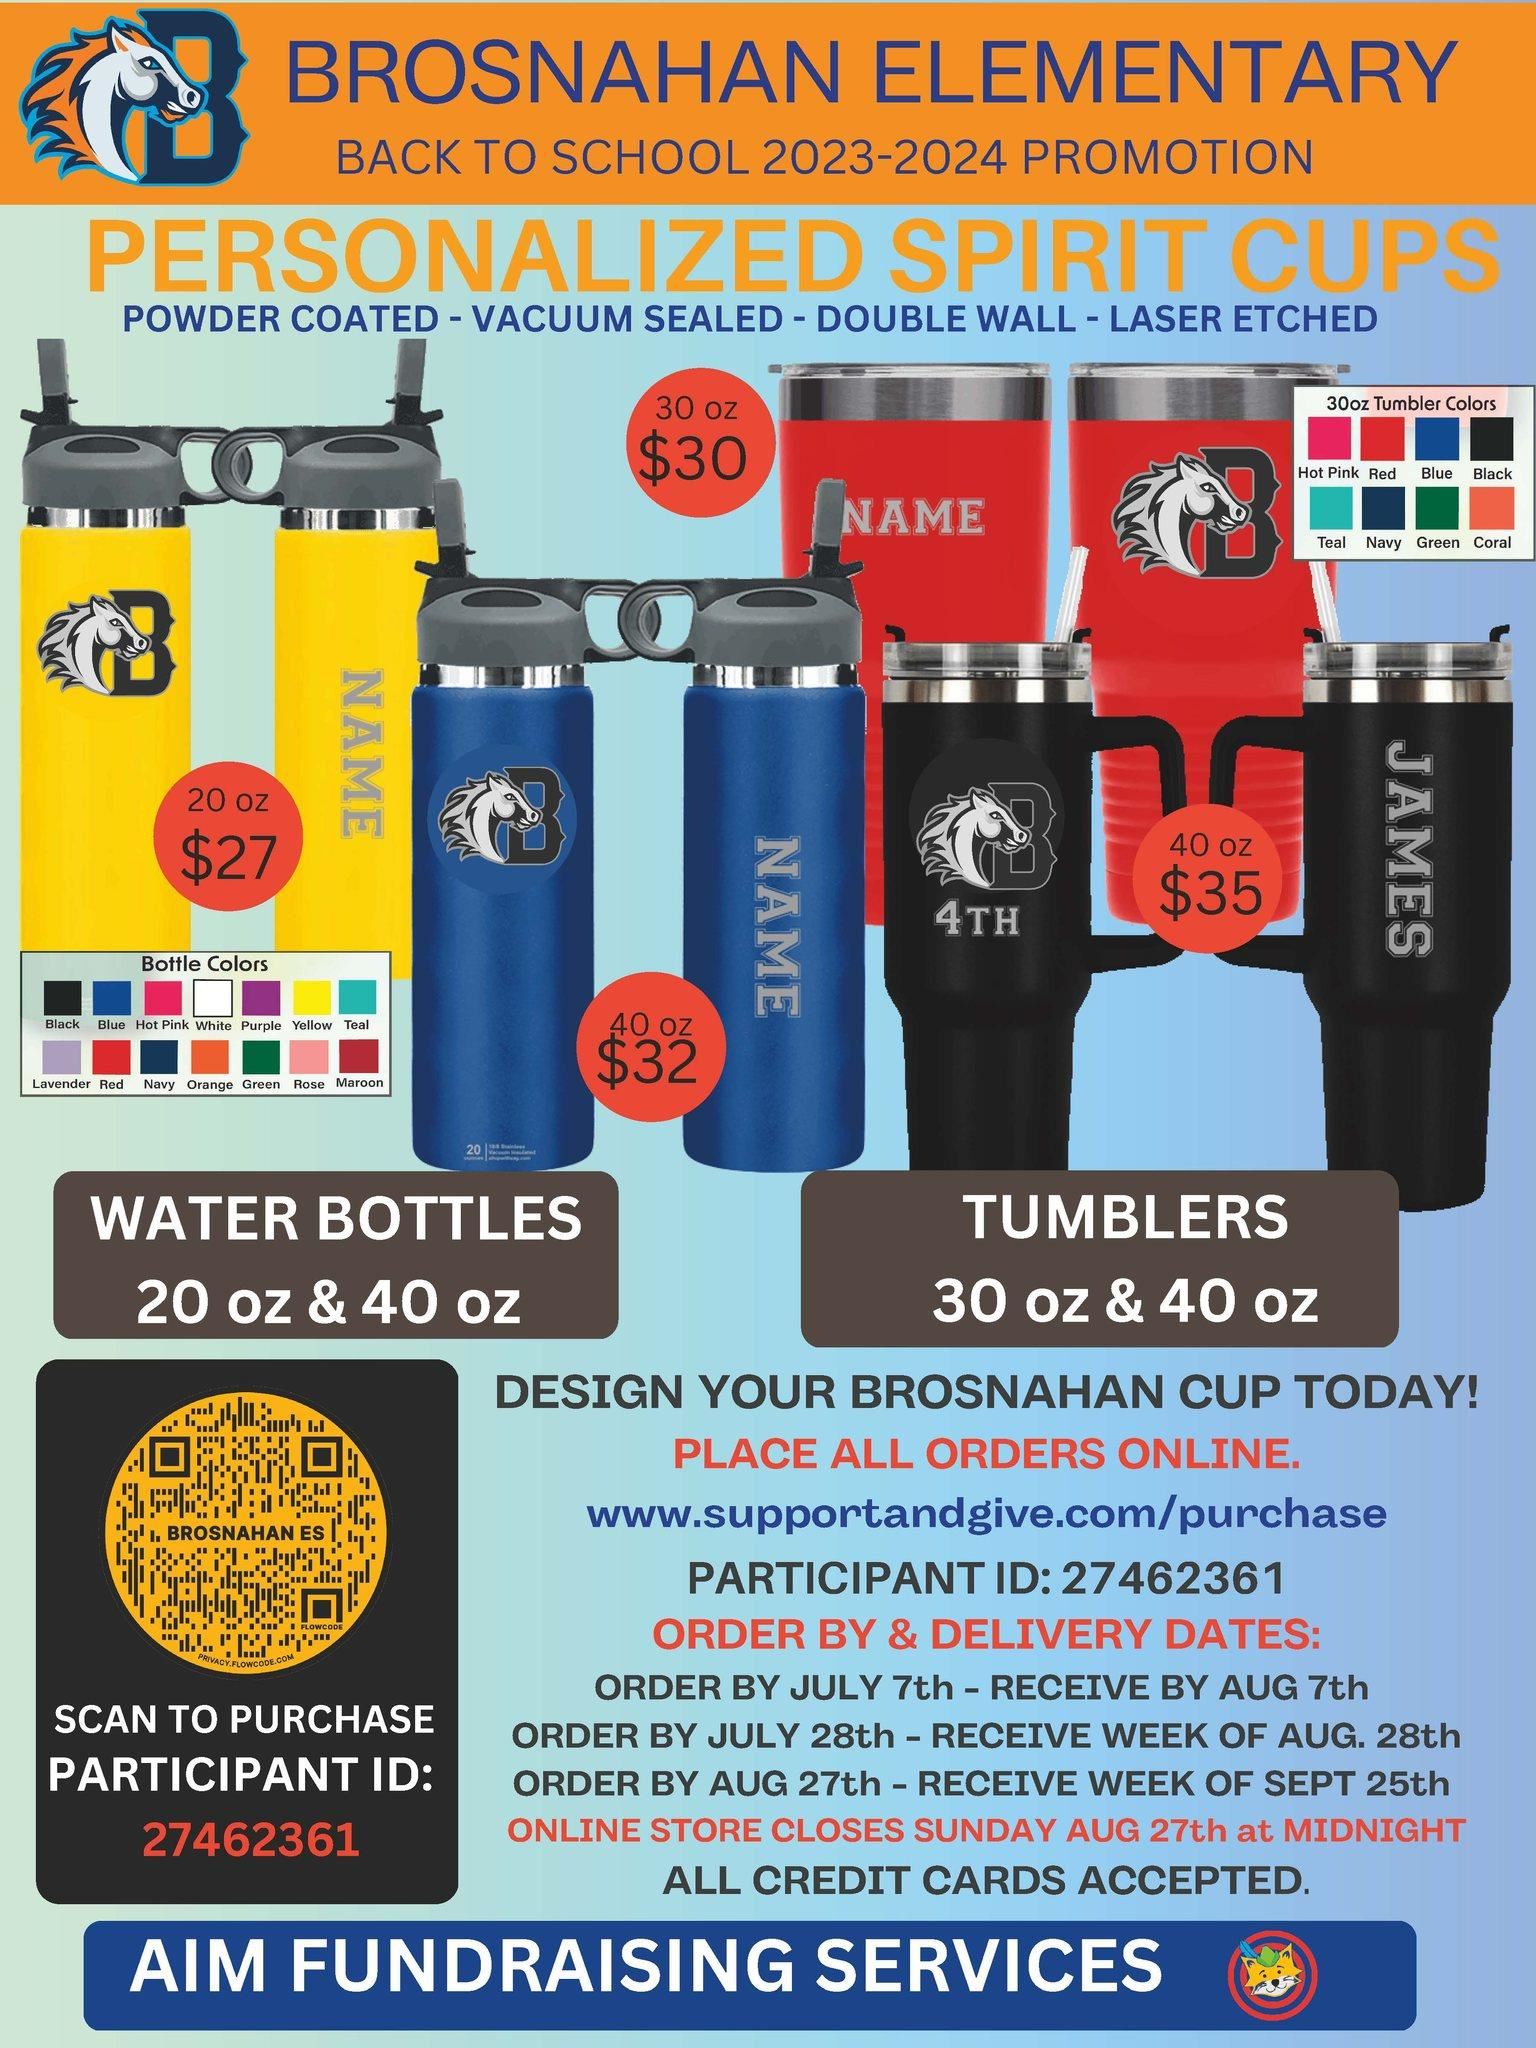 Brosnahan Back to School Personalized Spirit Cups Promotion  To donate or purchase an item, go to www.supportandgive.con/purchase and use Participant ID 27462361.